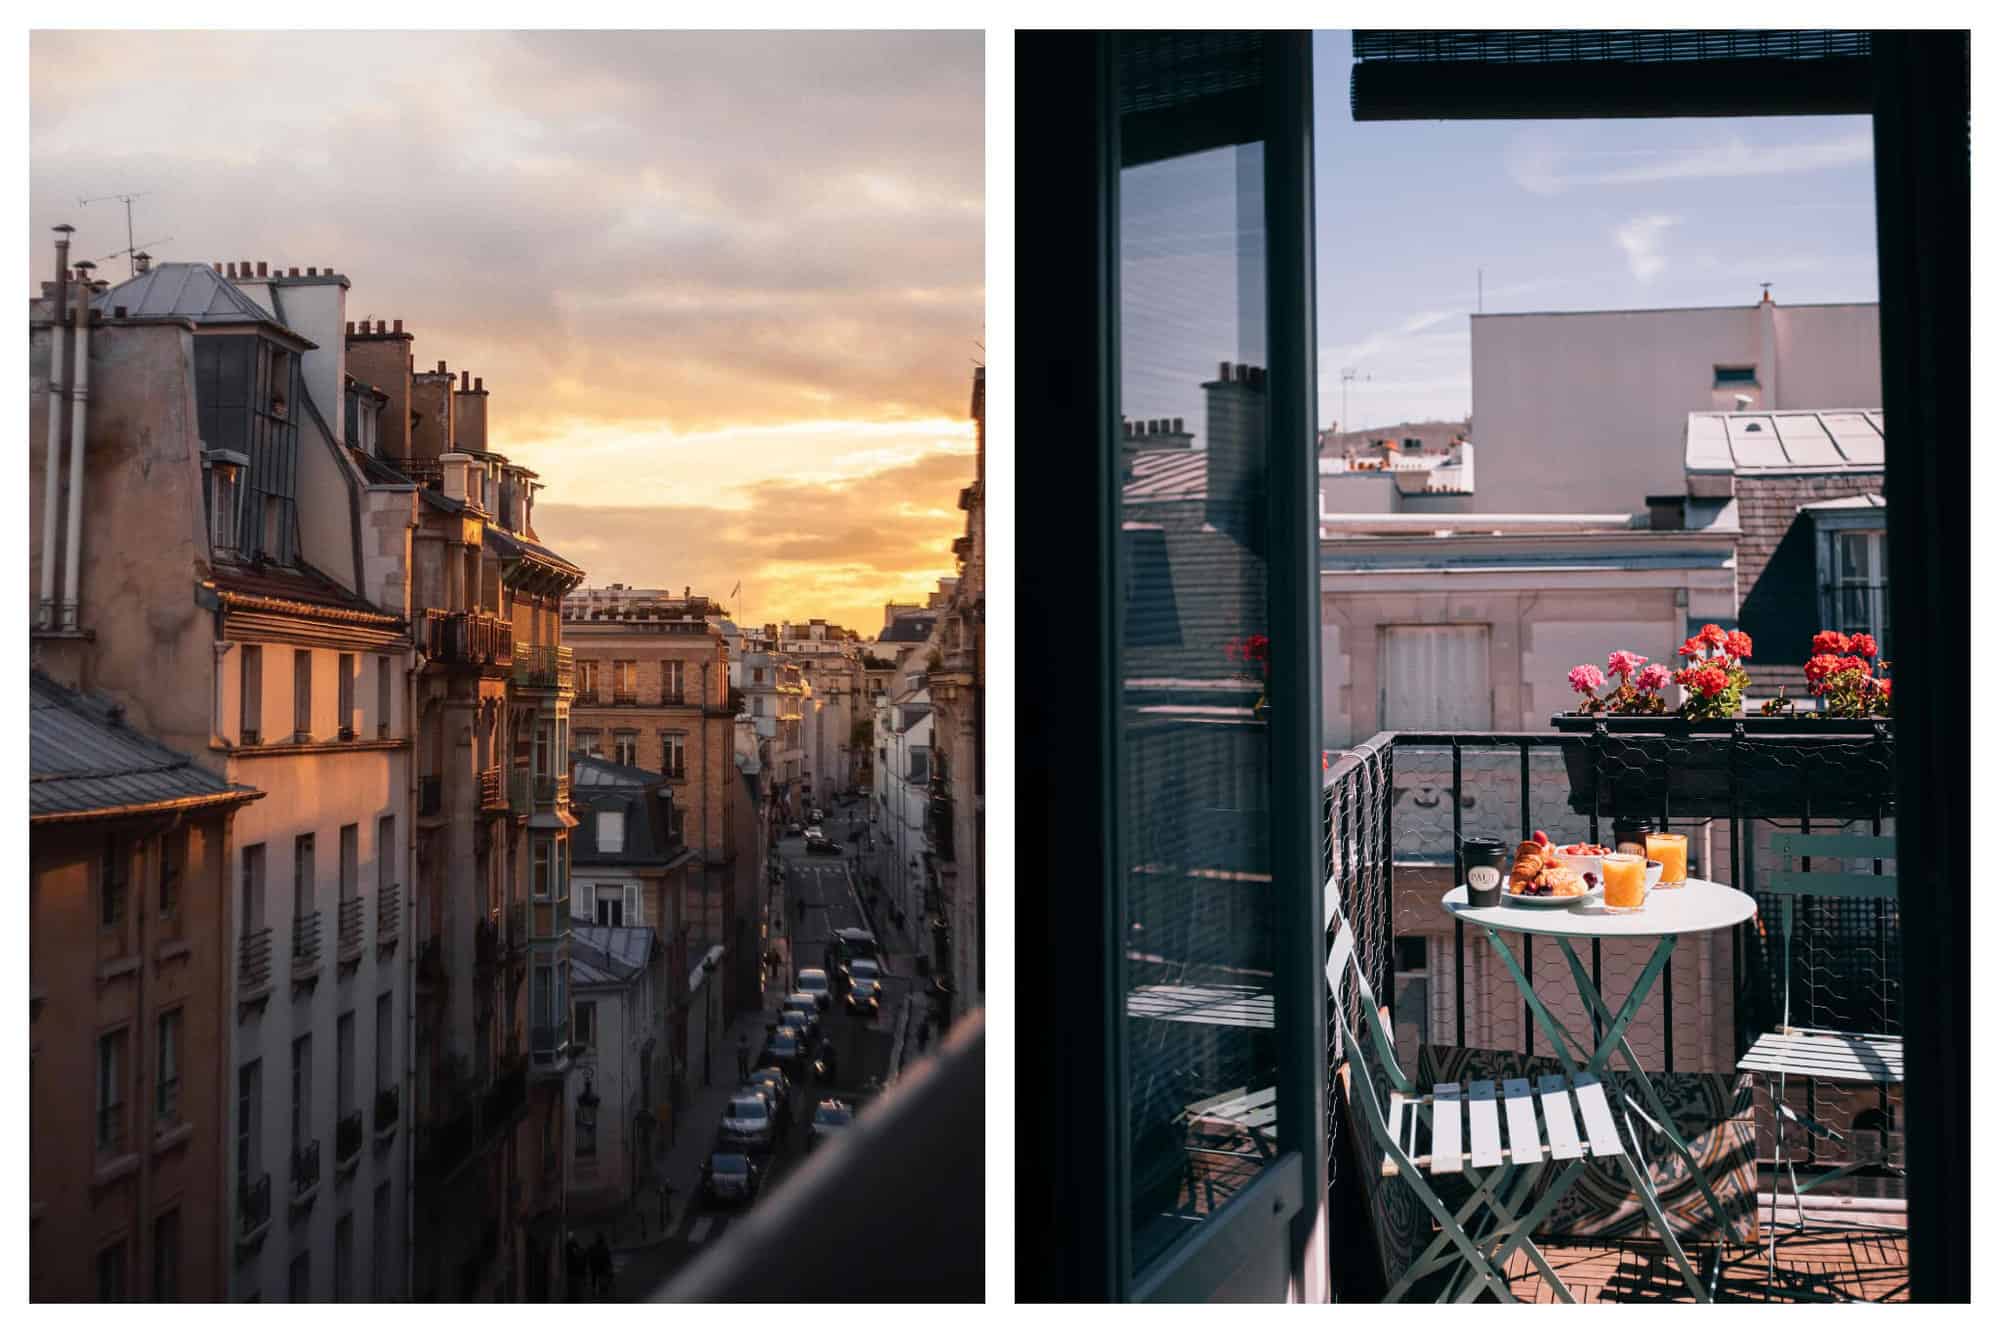 Left: A Parisian street during sunset, with its street lined with cars and buildings and with an orange cloudy sky. Right: A Parisian balcony with brunch food and drinks on the table, such as croissants, coffee, and orange juice.